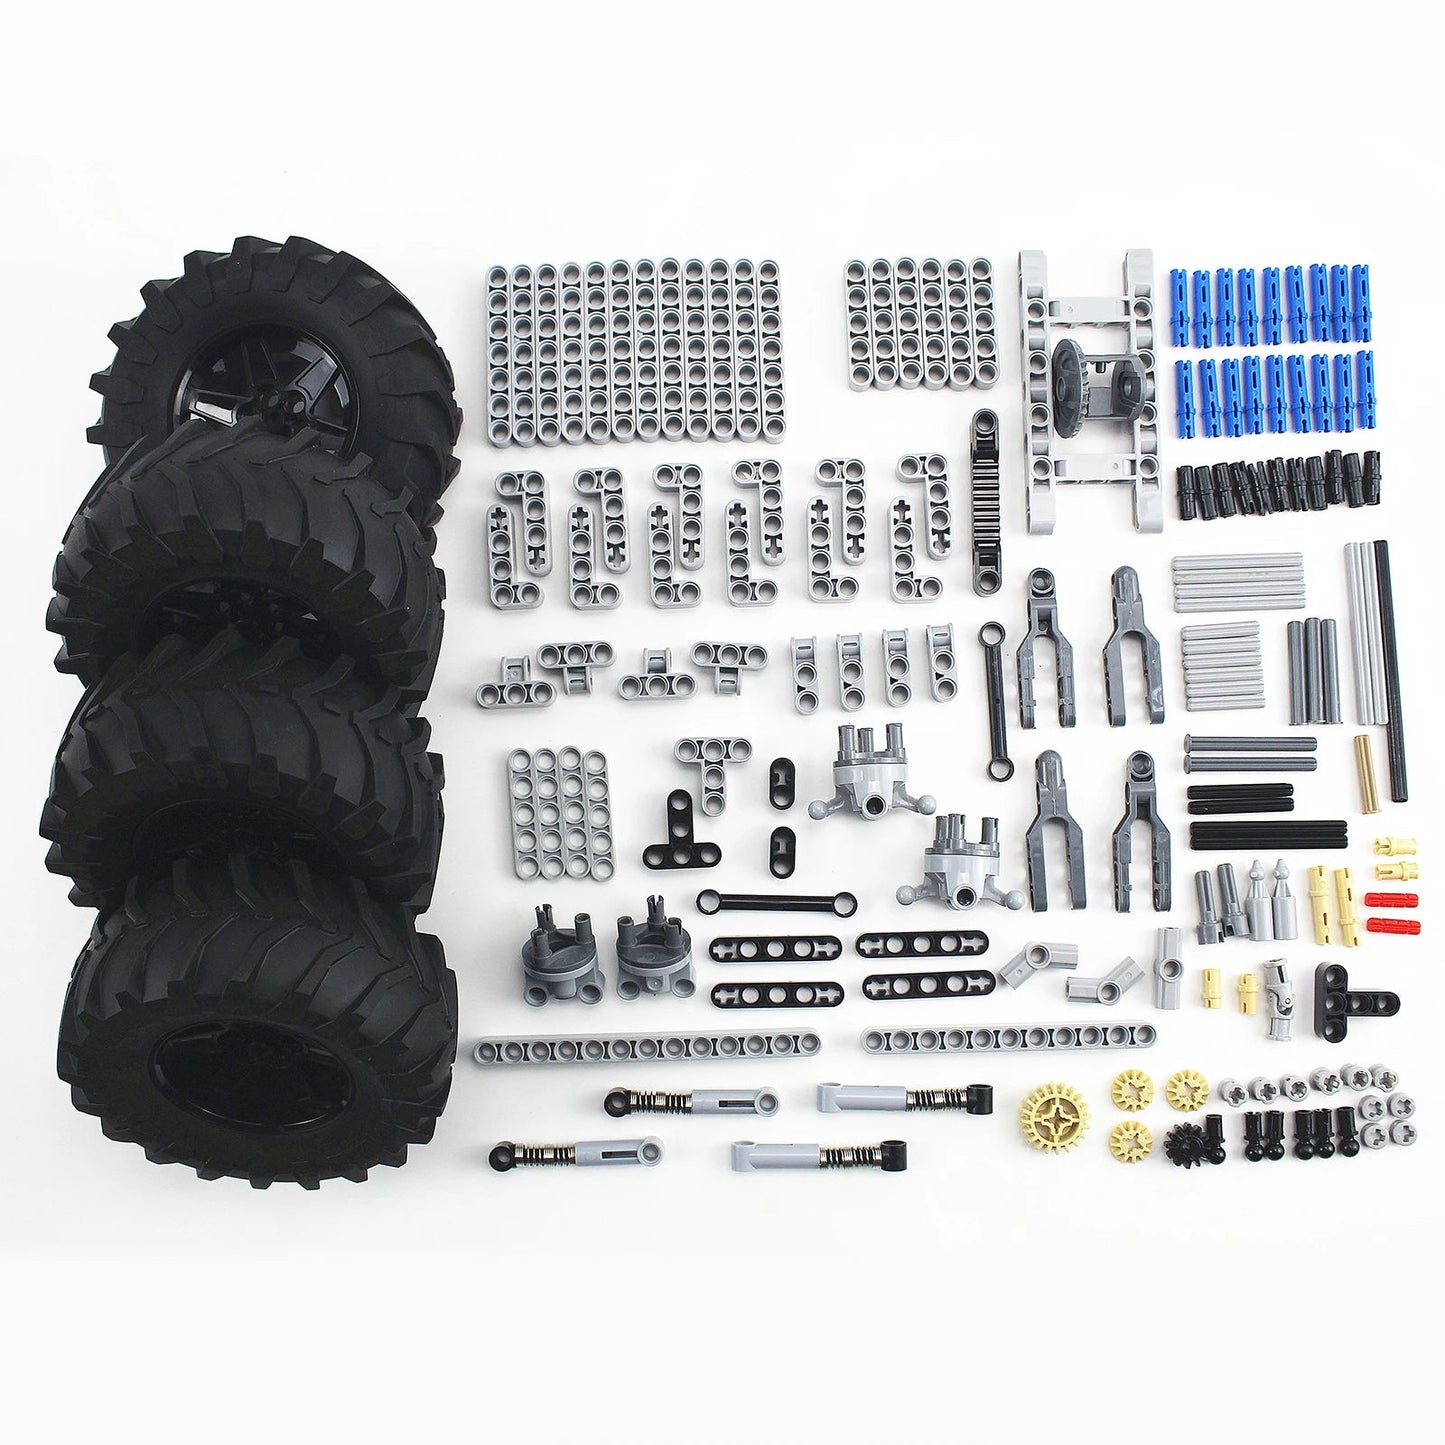 Suspension System and Tires Technical Parts Set for Cars